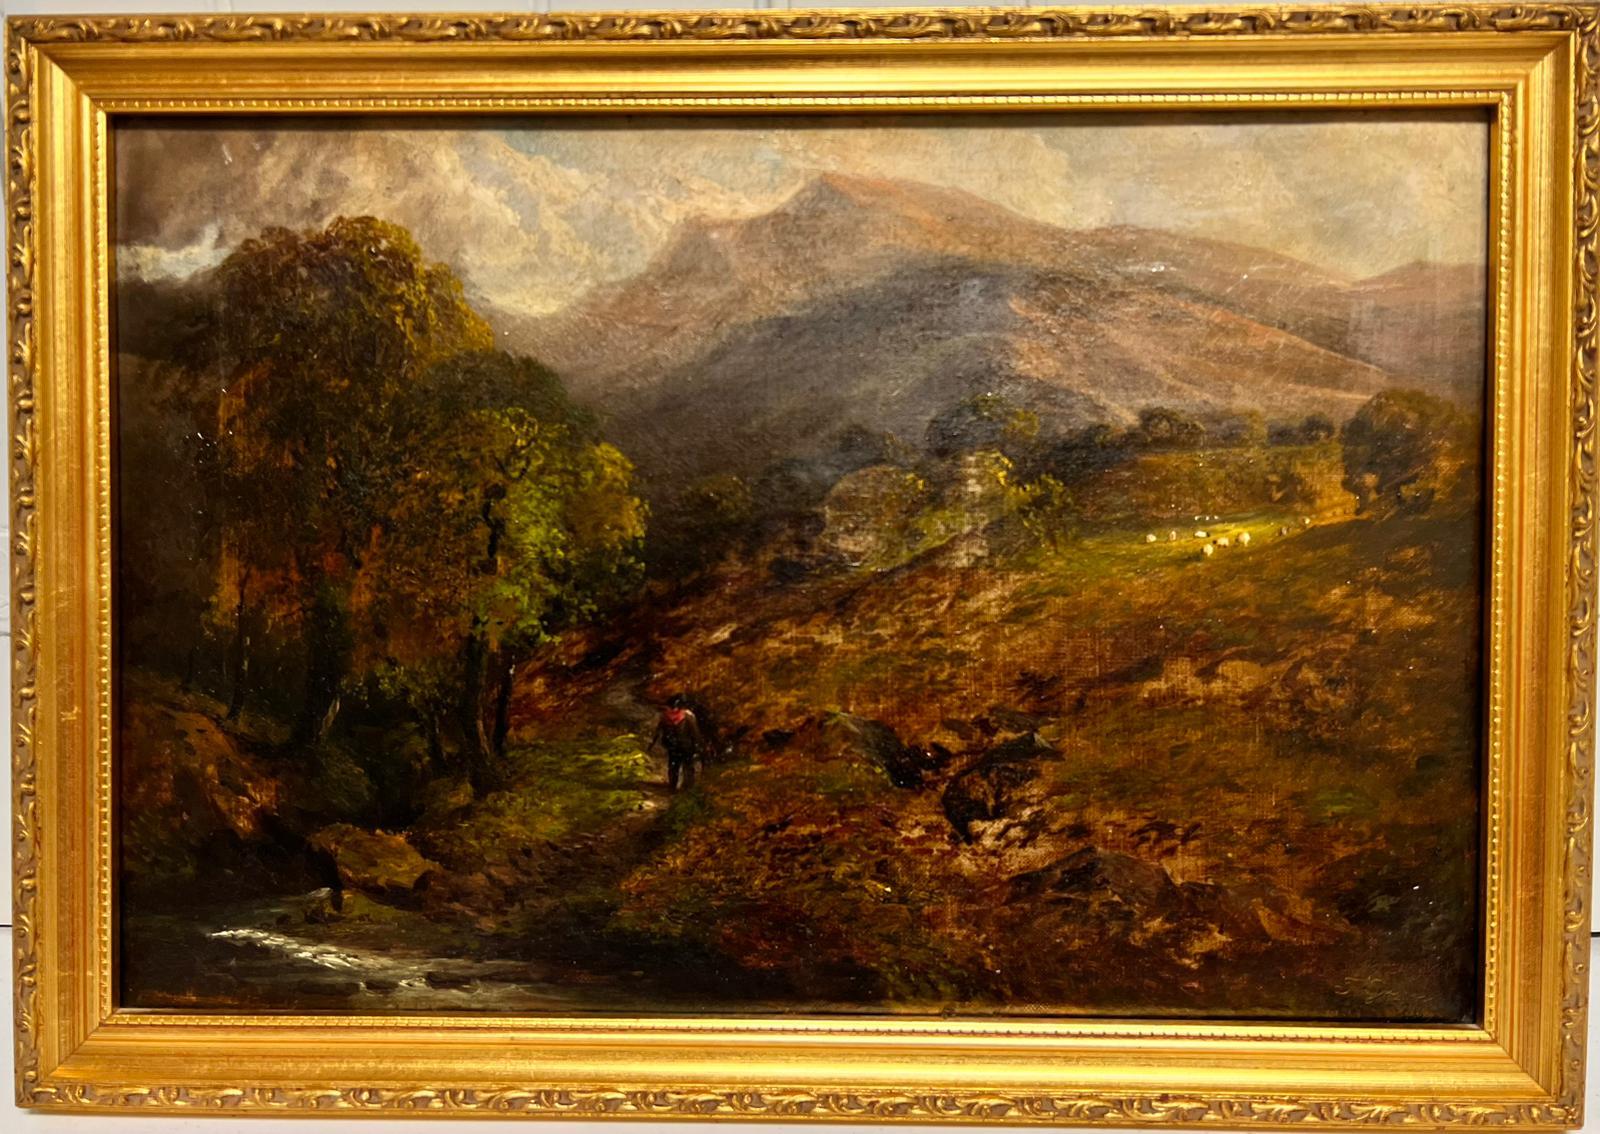 J.Green Figurative Painting - Victorian Oil Painting Scottish Highland Landscape Figure by Stream & Sheep